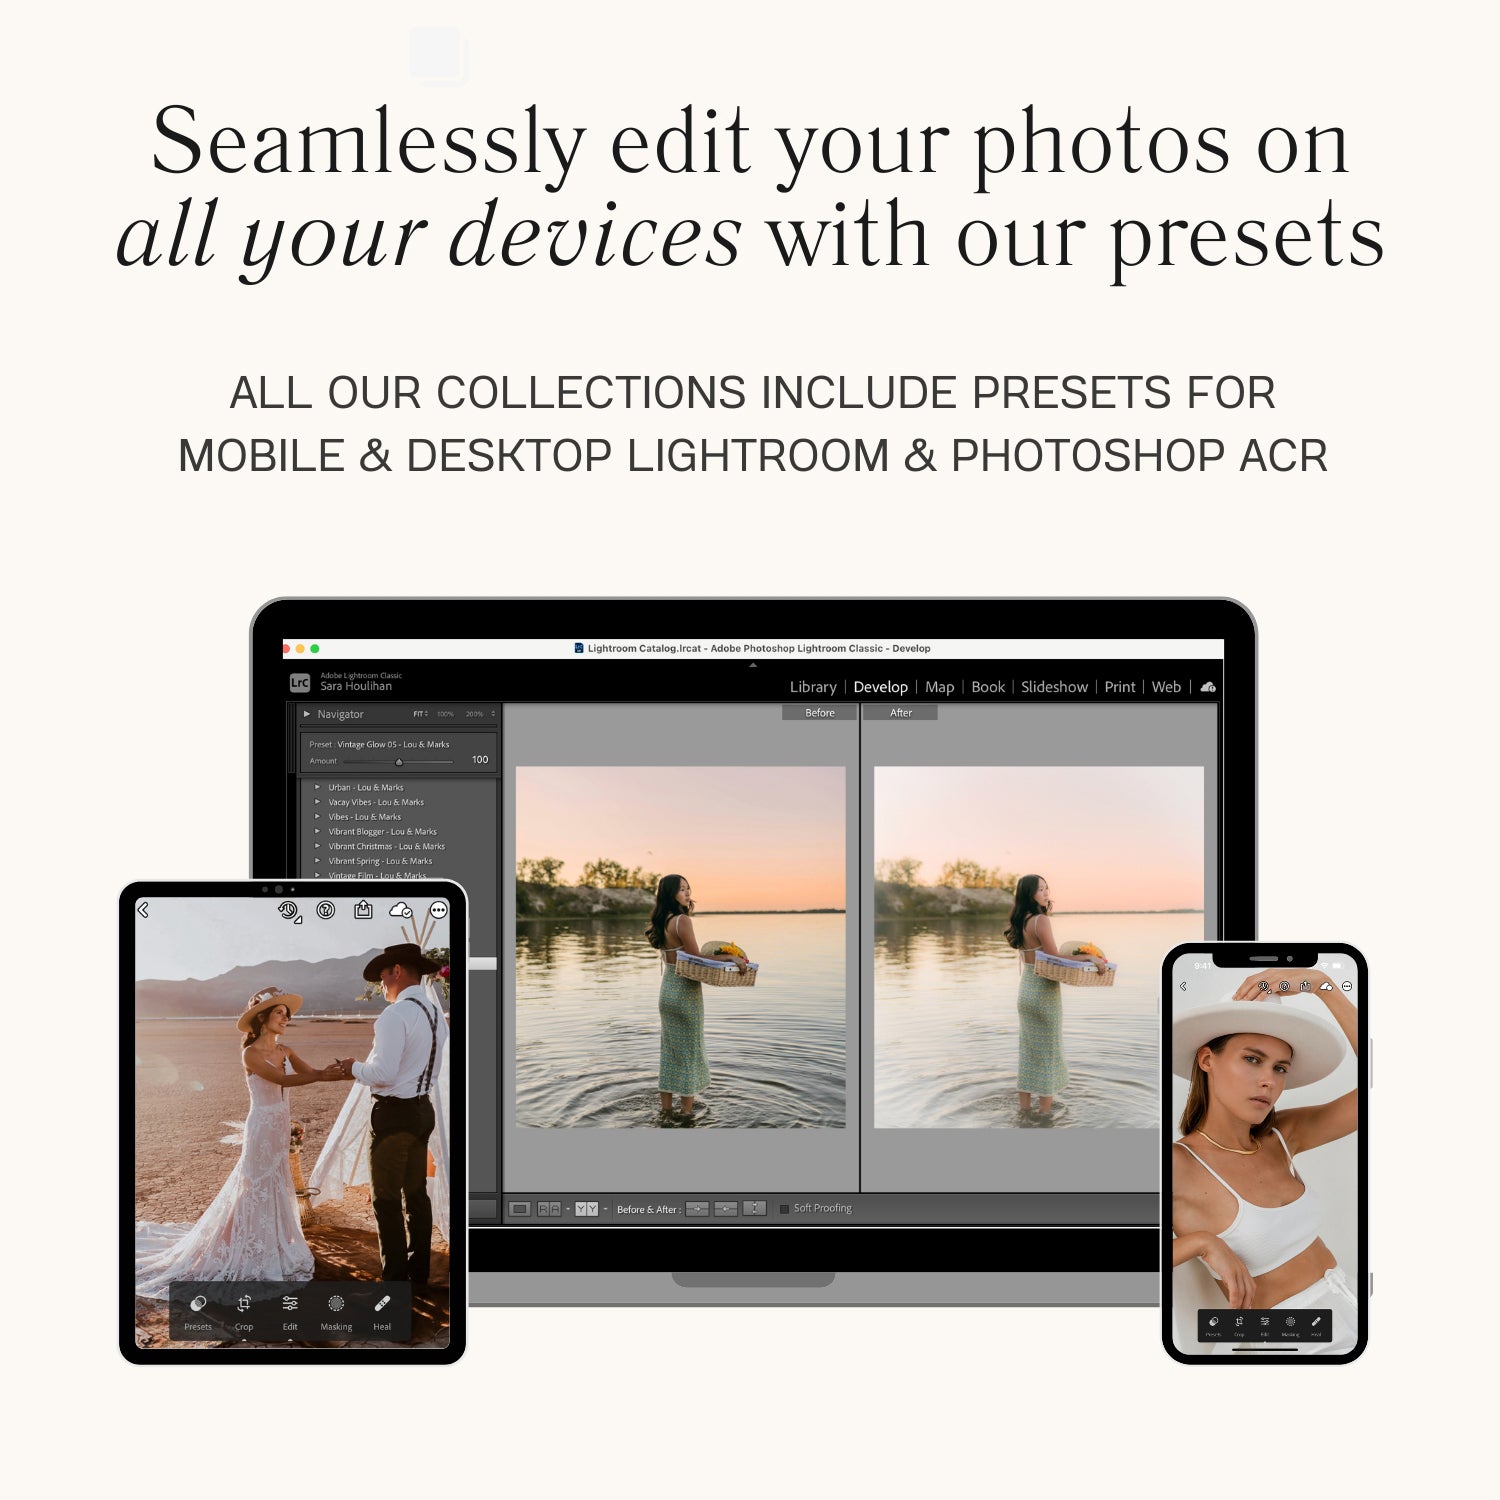 Adobe Best Christmas Lightroom Presets The Best Photo Editing Preset Filters For Christmas And Winter Holiday Photos with Adobe Lightroom Mobile And Desktop For Photographers and Instagram Influencers By Lou And Marks Presets